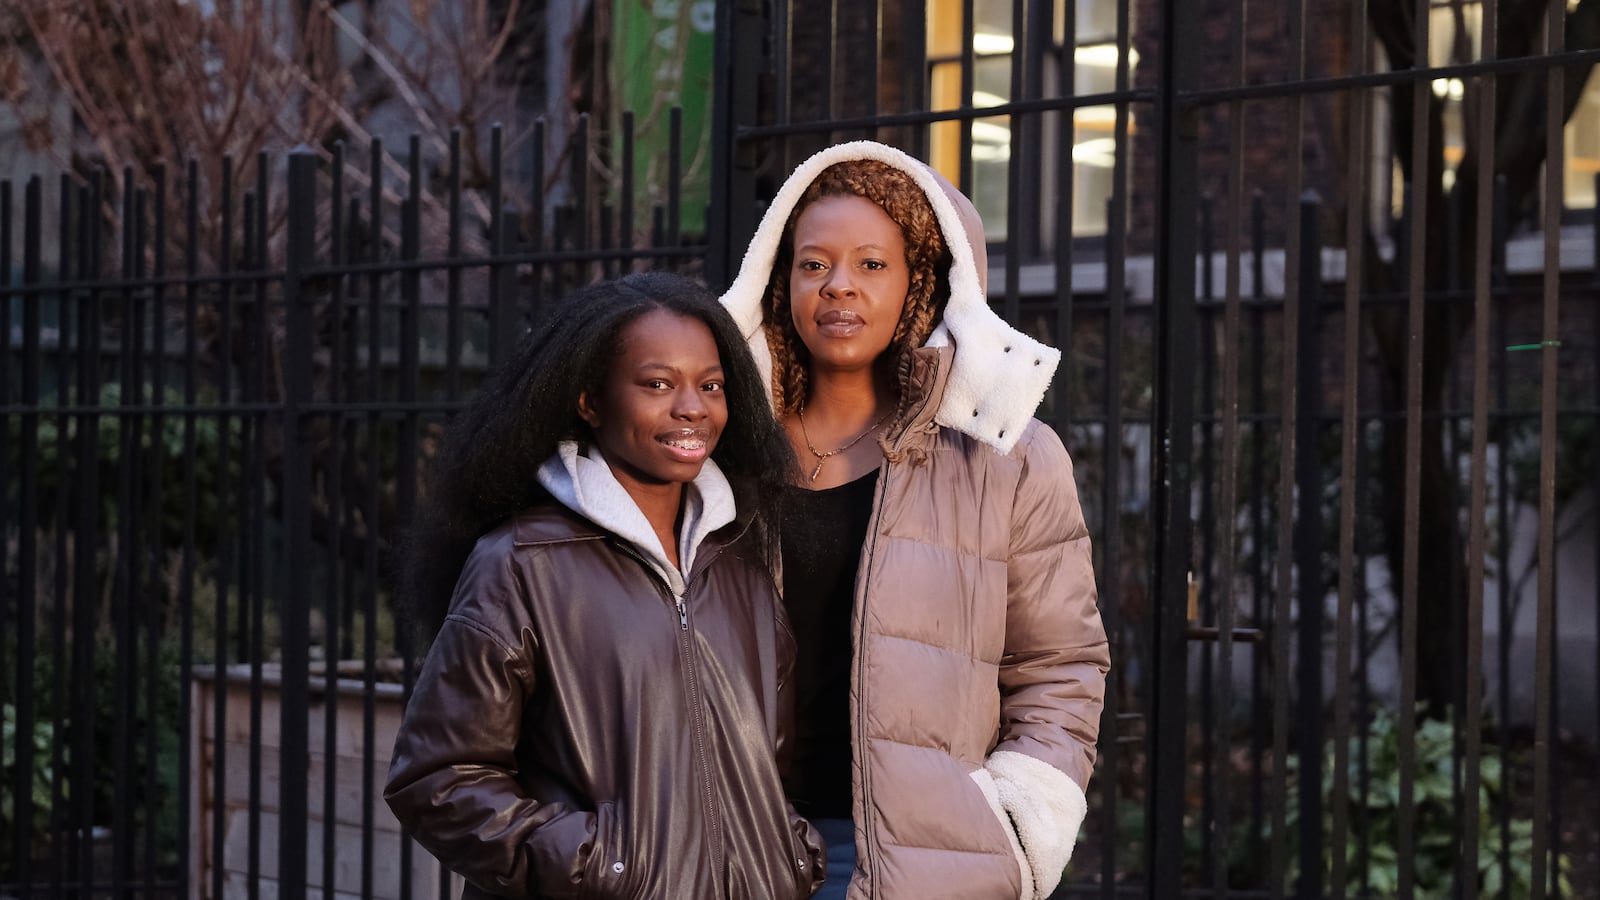 An adult woman and her daughter wear winter jackets and stand next to each other posing for a portrait outside with a black gate in the background.